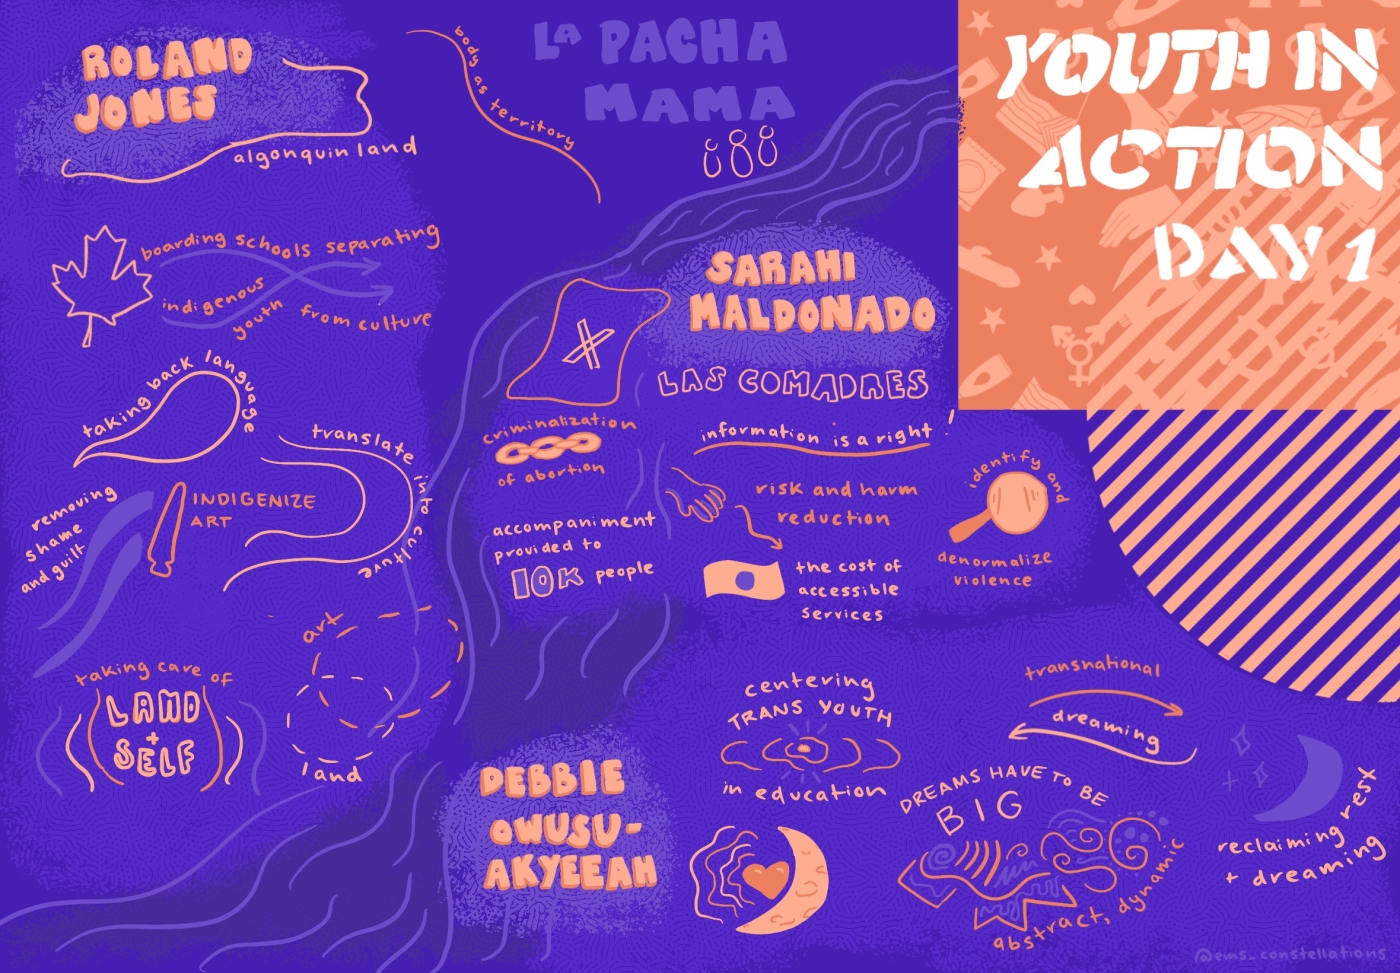 A visual brainstorm of the first day of the Youth in Action Forum in orange writing on a purple background. Words describe the forum's participants, expectations, and SRHR concepts.